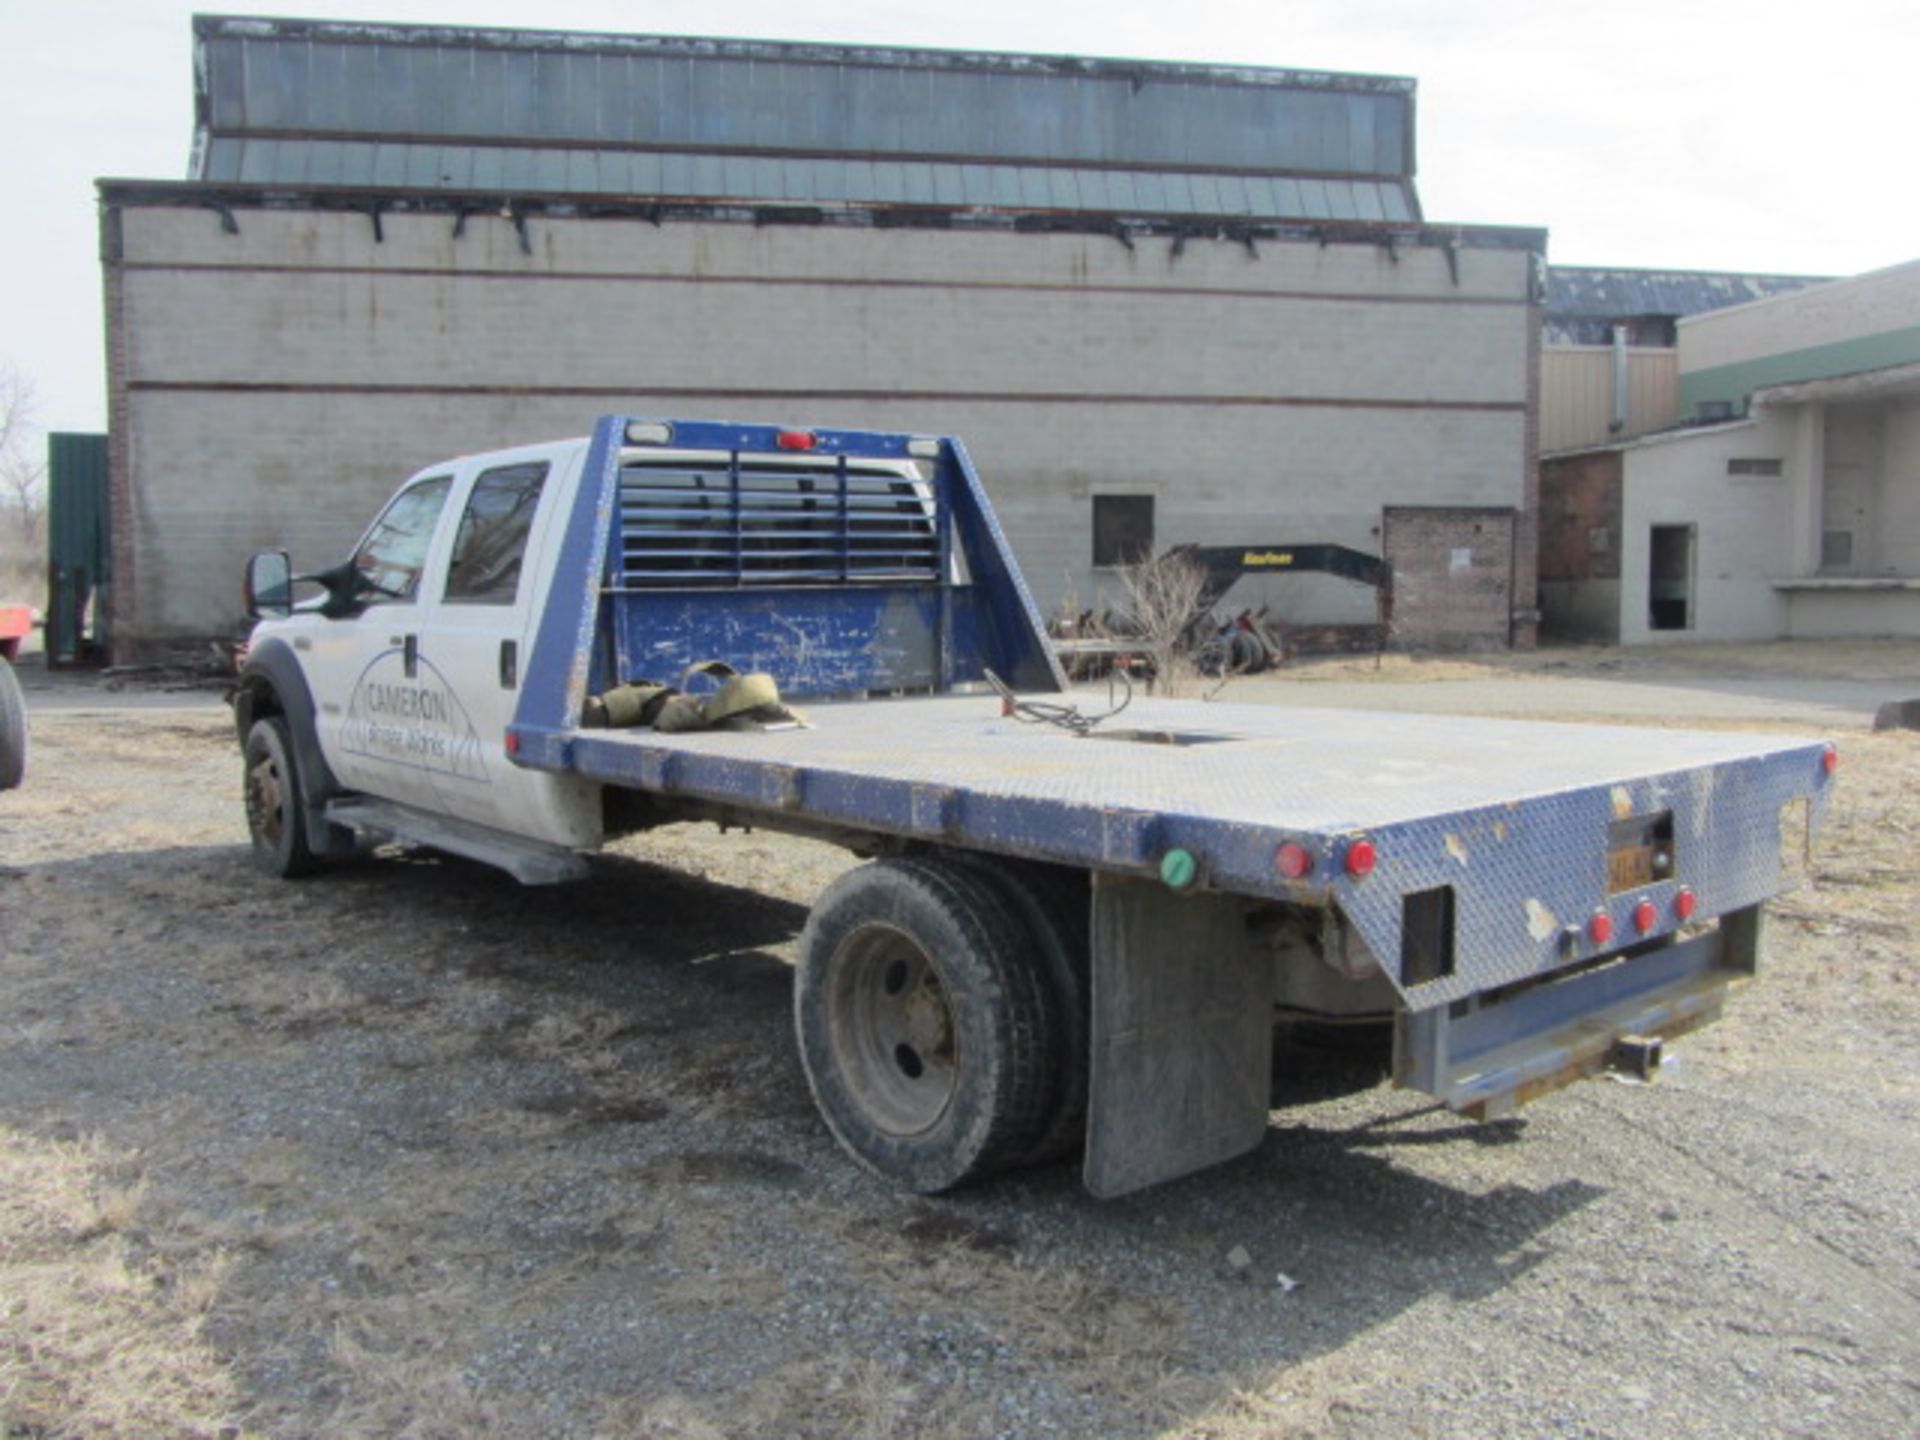 Ford F550 XLT Super Duty Flat Bed Truck with Gooseneck Hitch, 10' Diamond Plate Deck, Dual Rear - Image 5 of 6